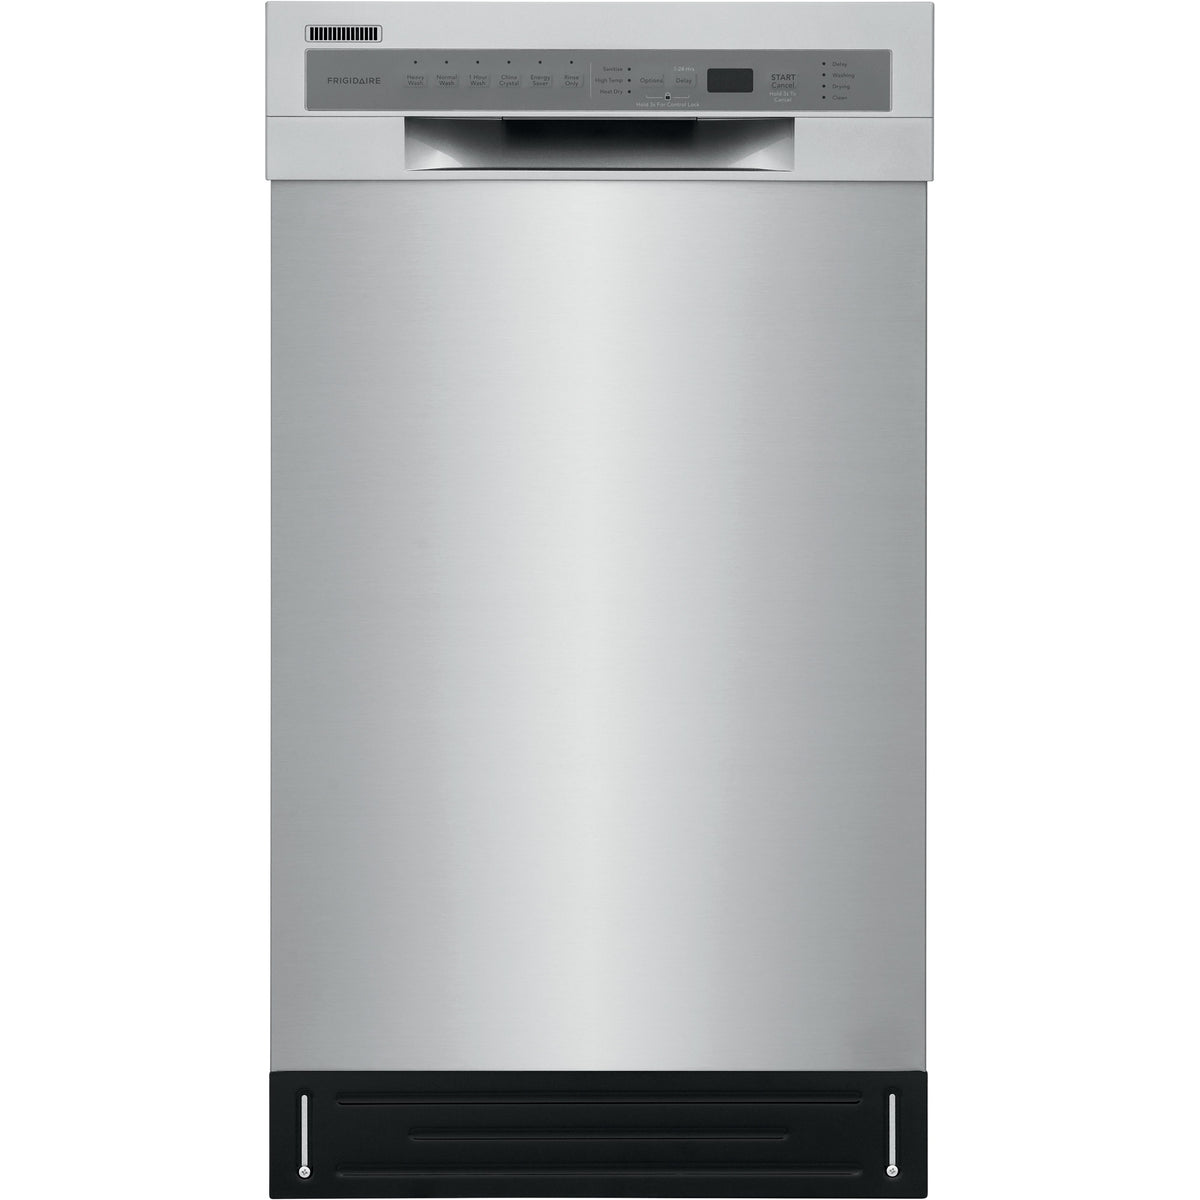 18-inch Built-in Dishwasher with Filtration System FFBD1831US IMAGE 1